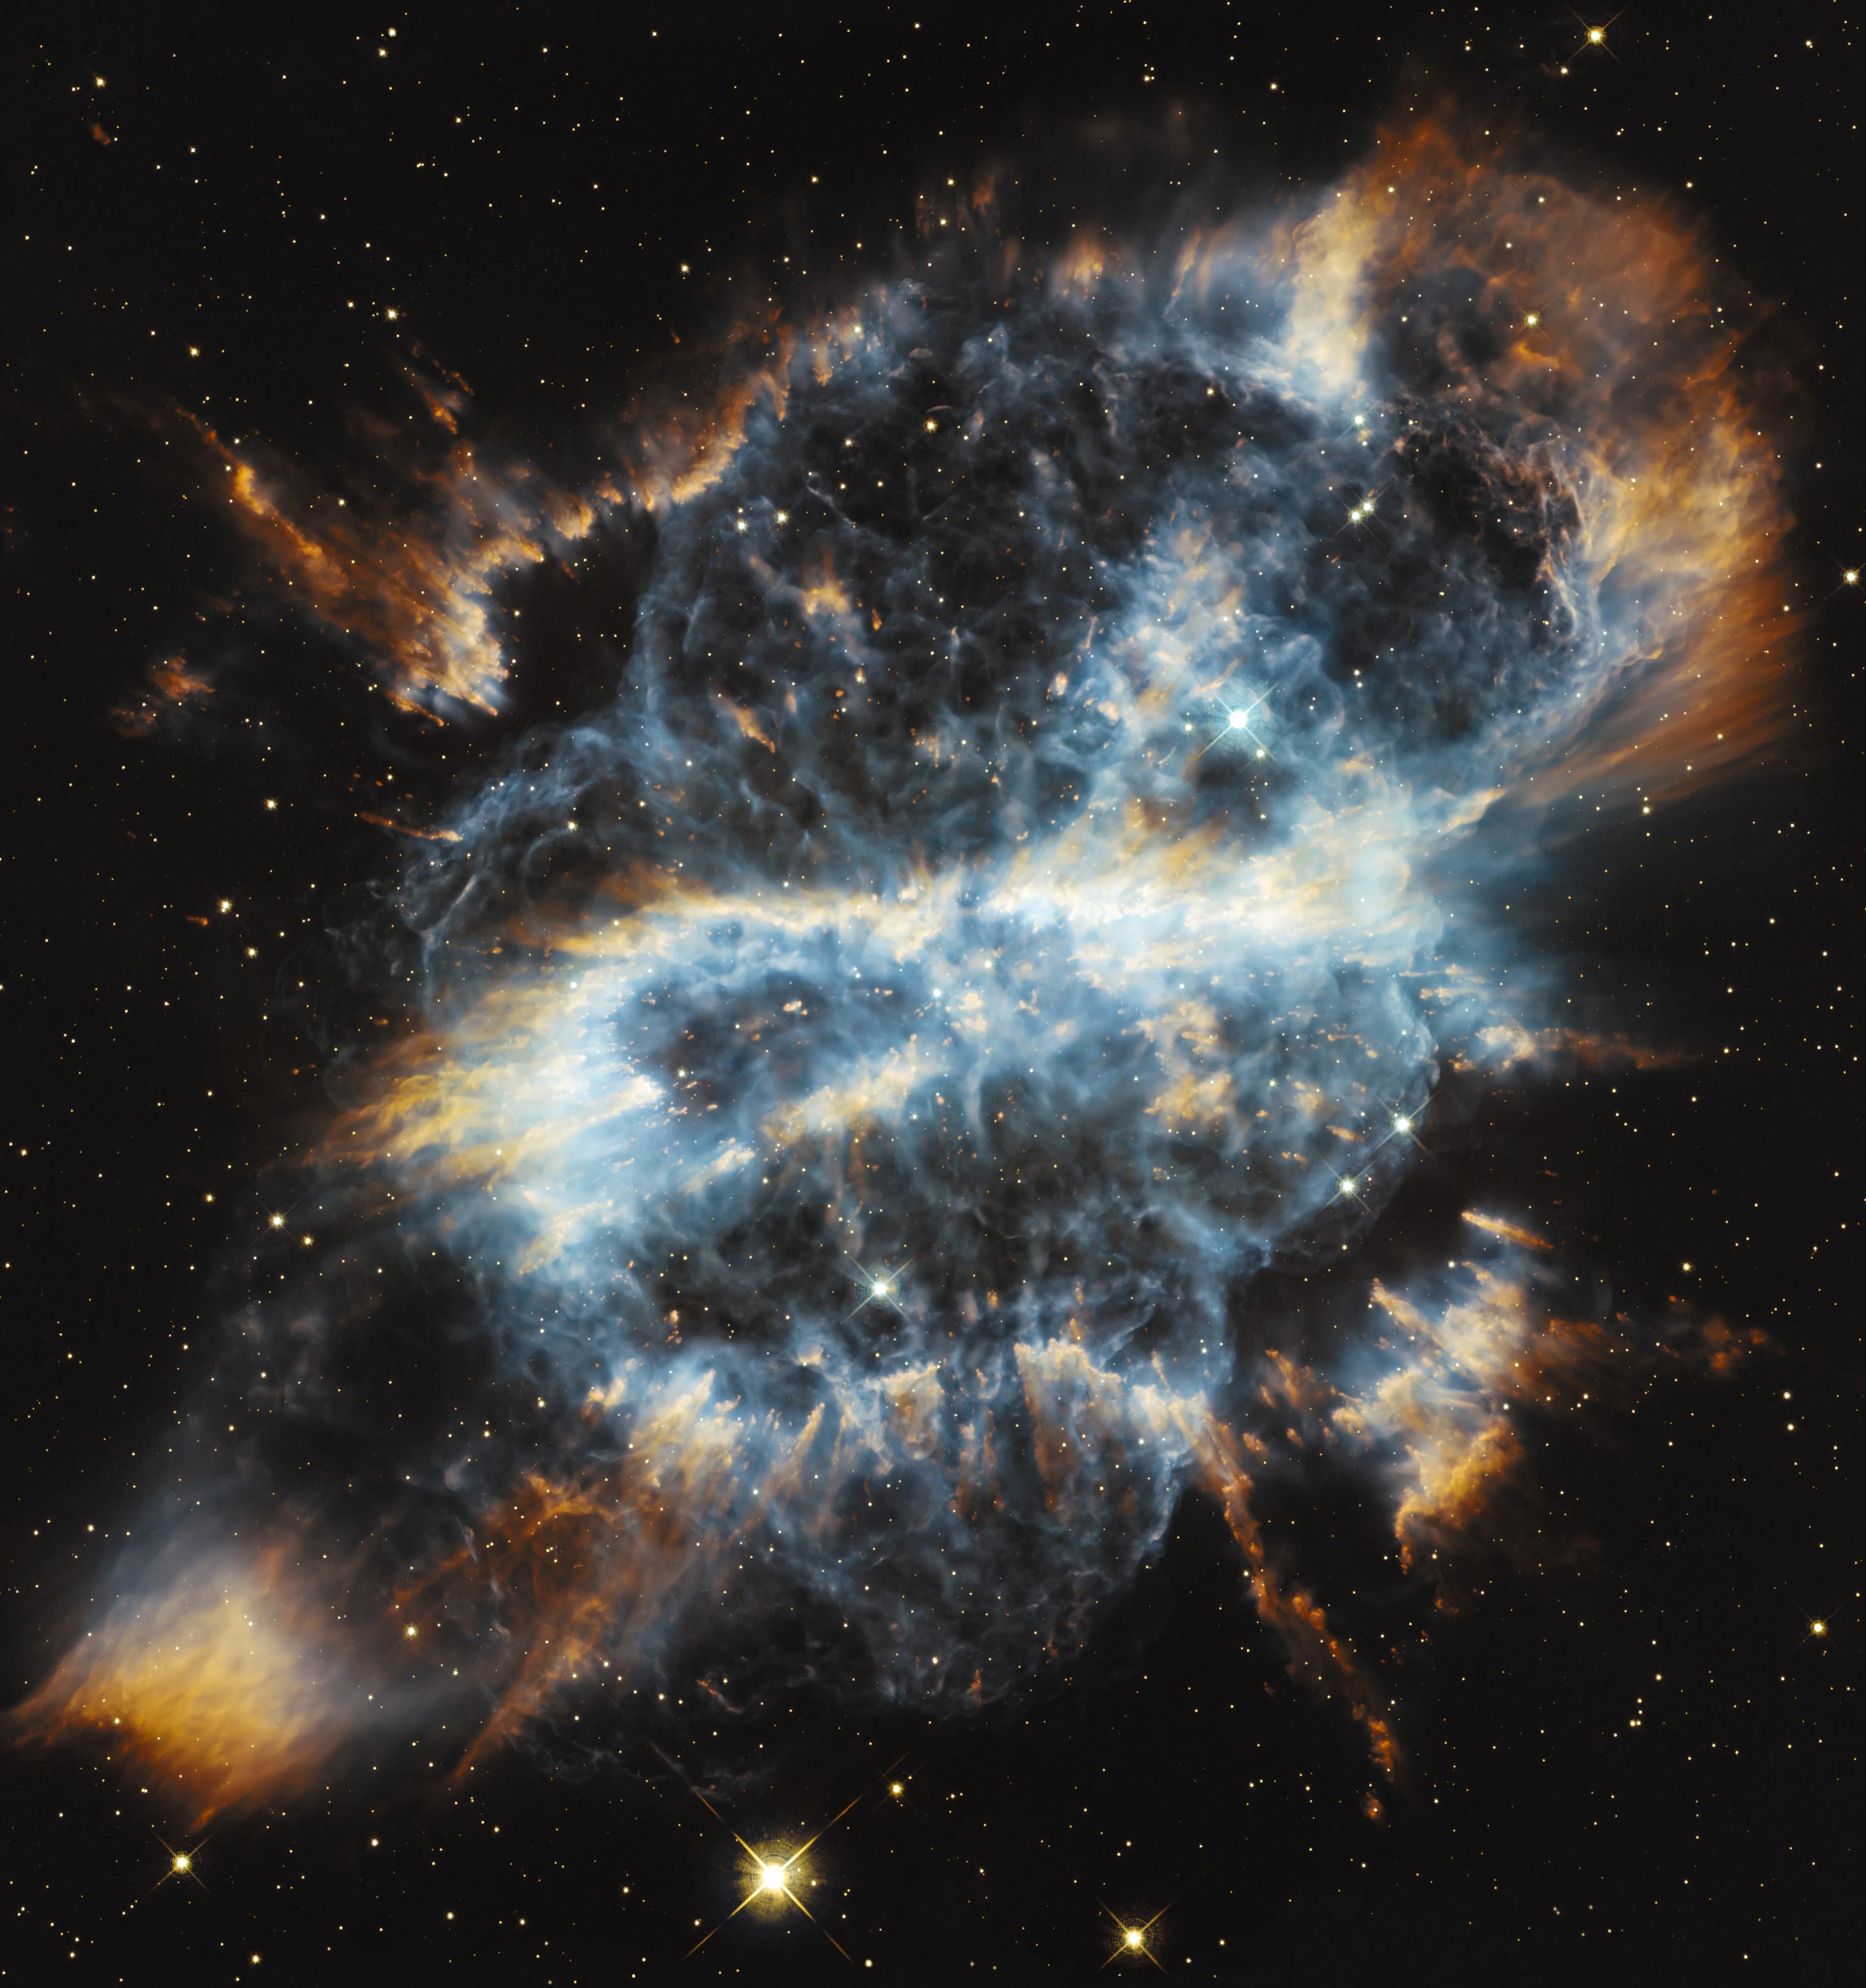 A cosmic holiday ornament, hubble-style